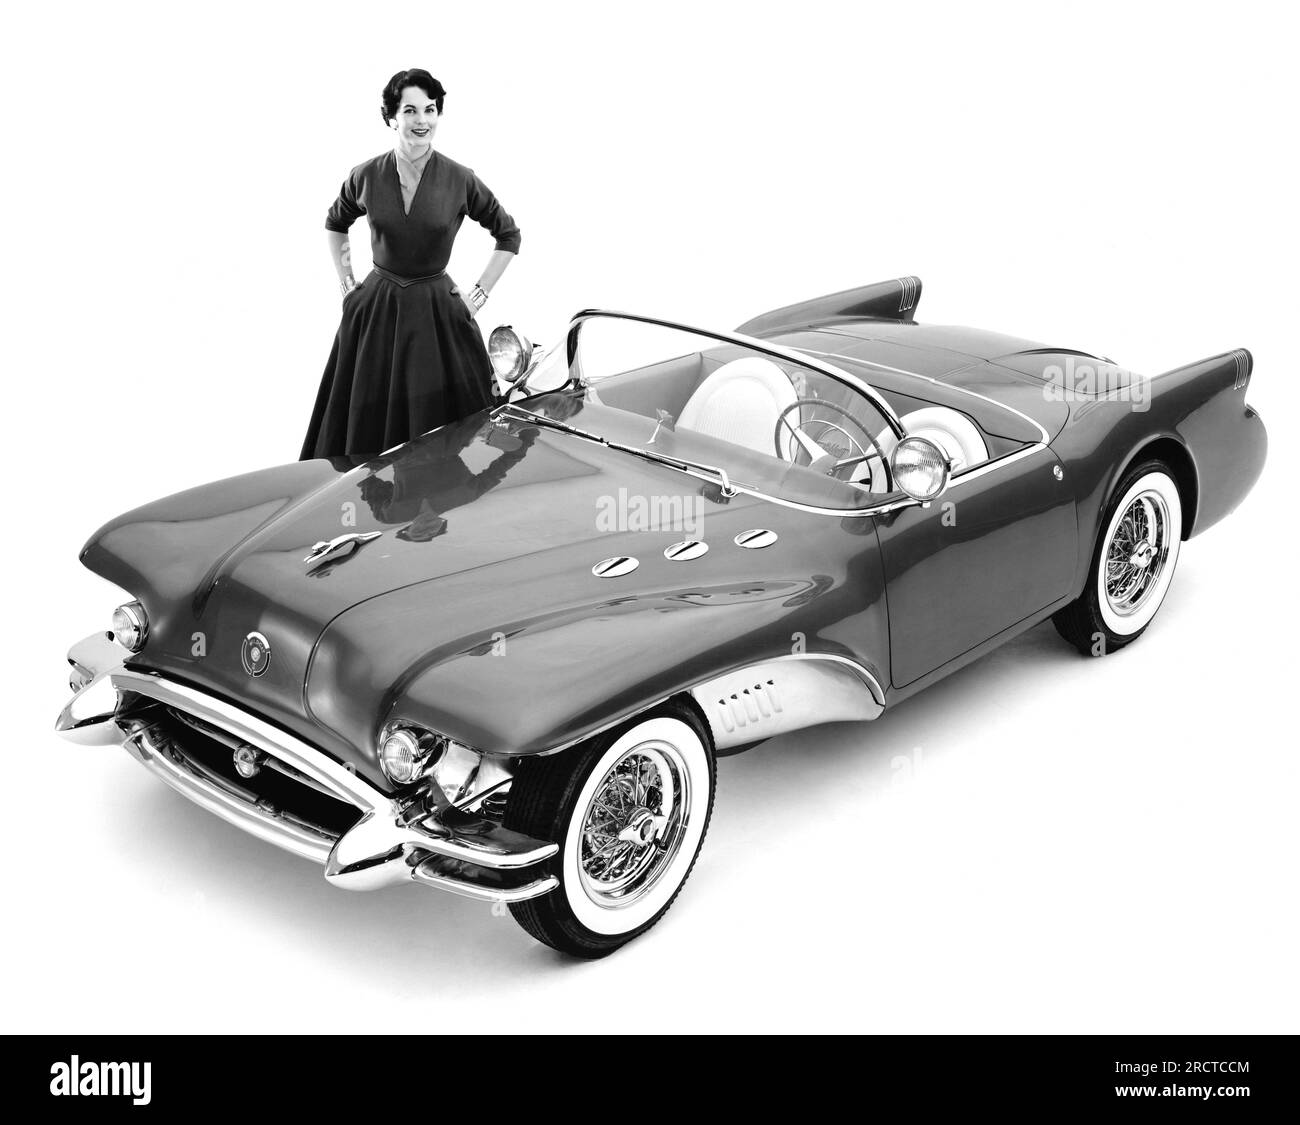 Detroit, MIchigan:  1954  A model with the Buick Wildcat II concept car designed by Harley Earl. Stock Photo